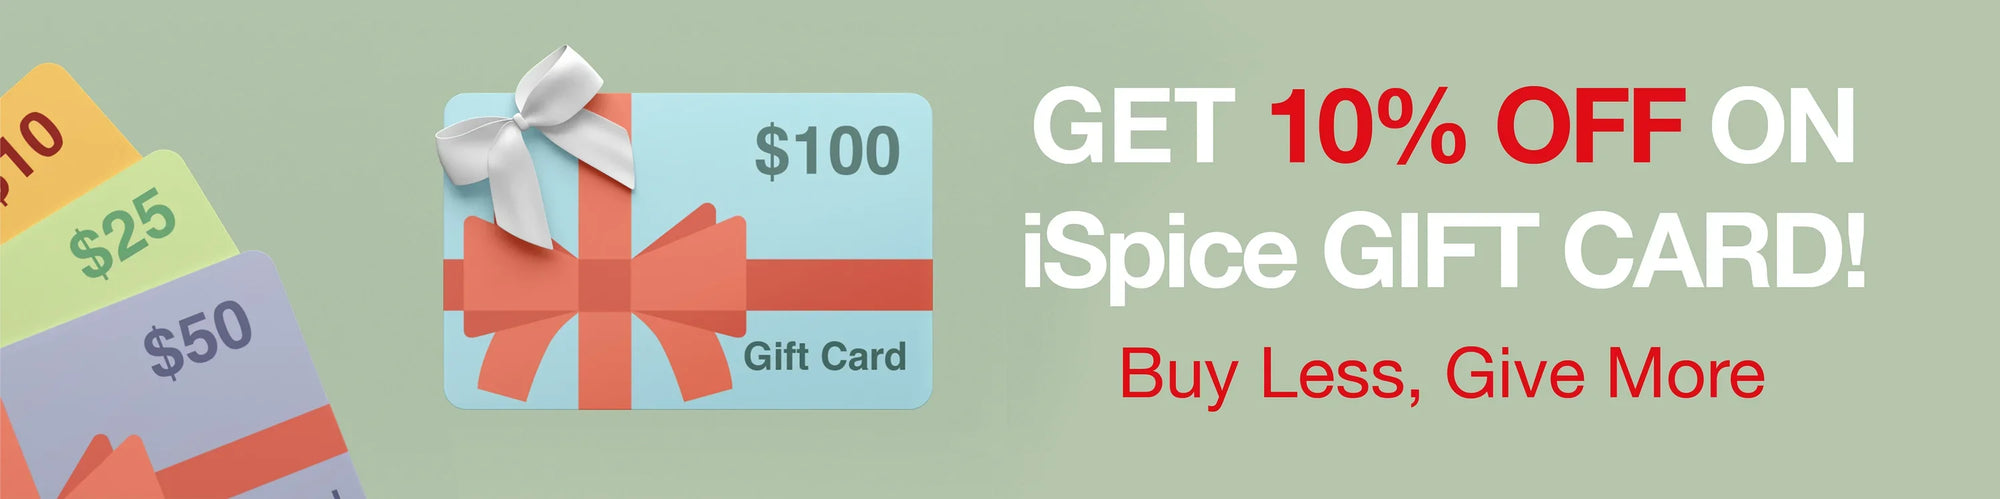 Unique Spice Gifts with Gift Cards 